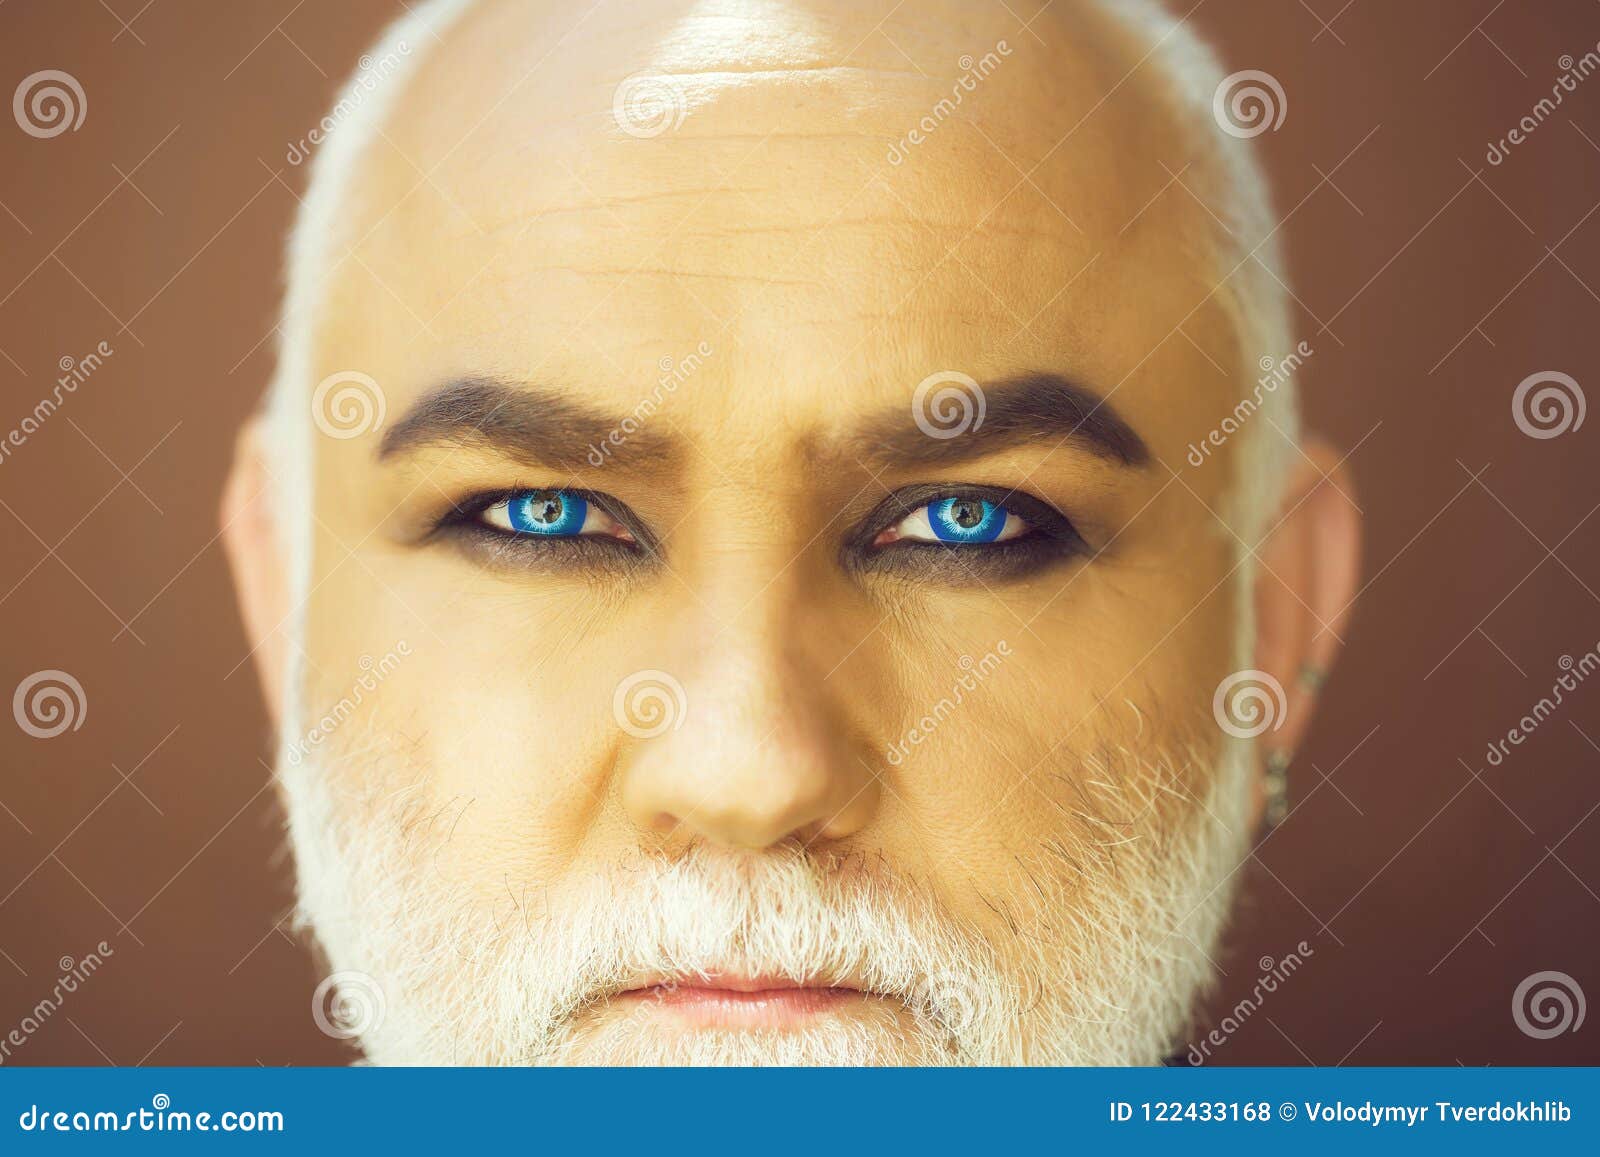 Blue-eyed man with white hair and beard - wide 2